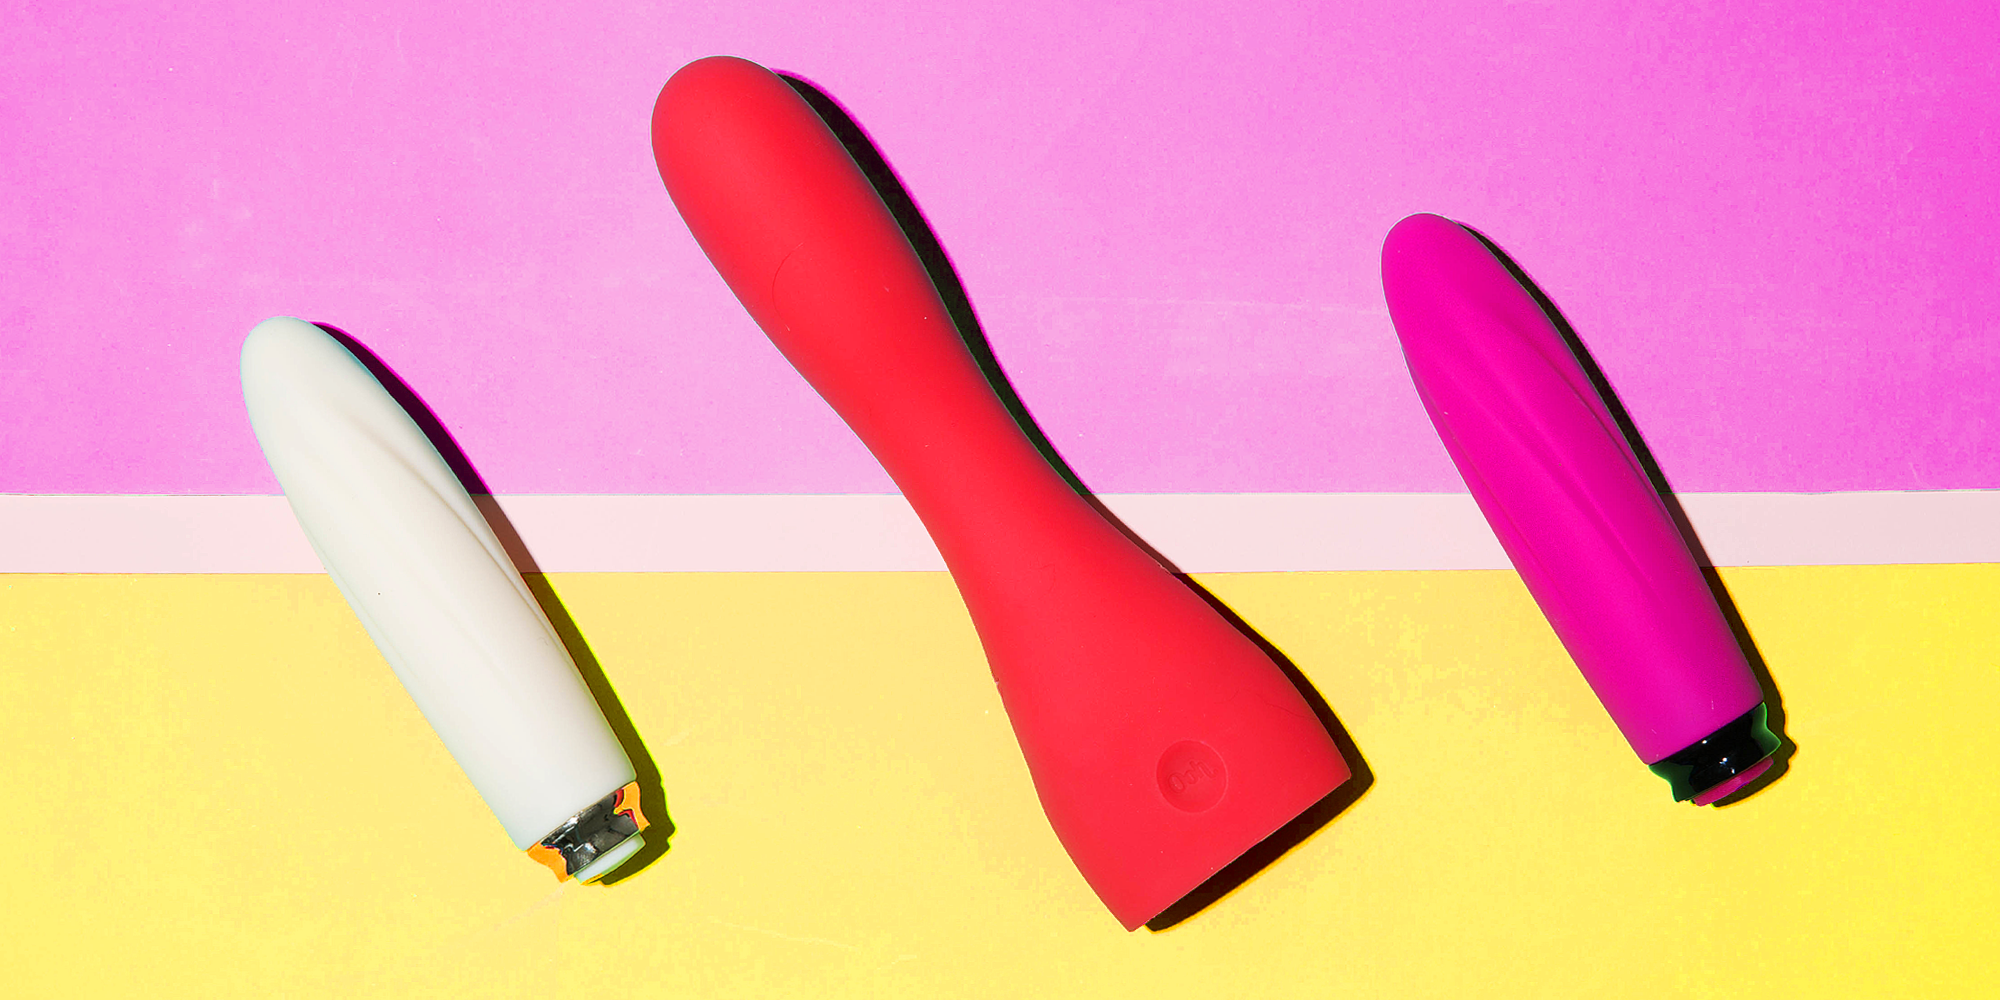 What Its Like to Only Be Able To Orgasm With a Vibrator